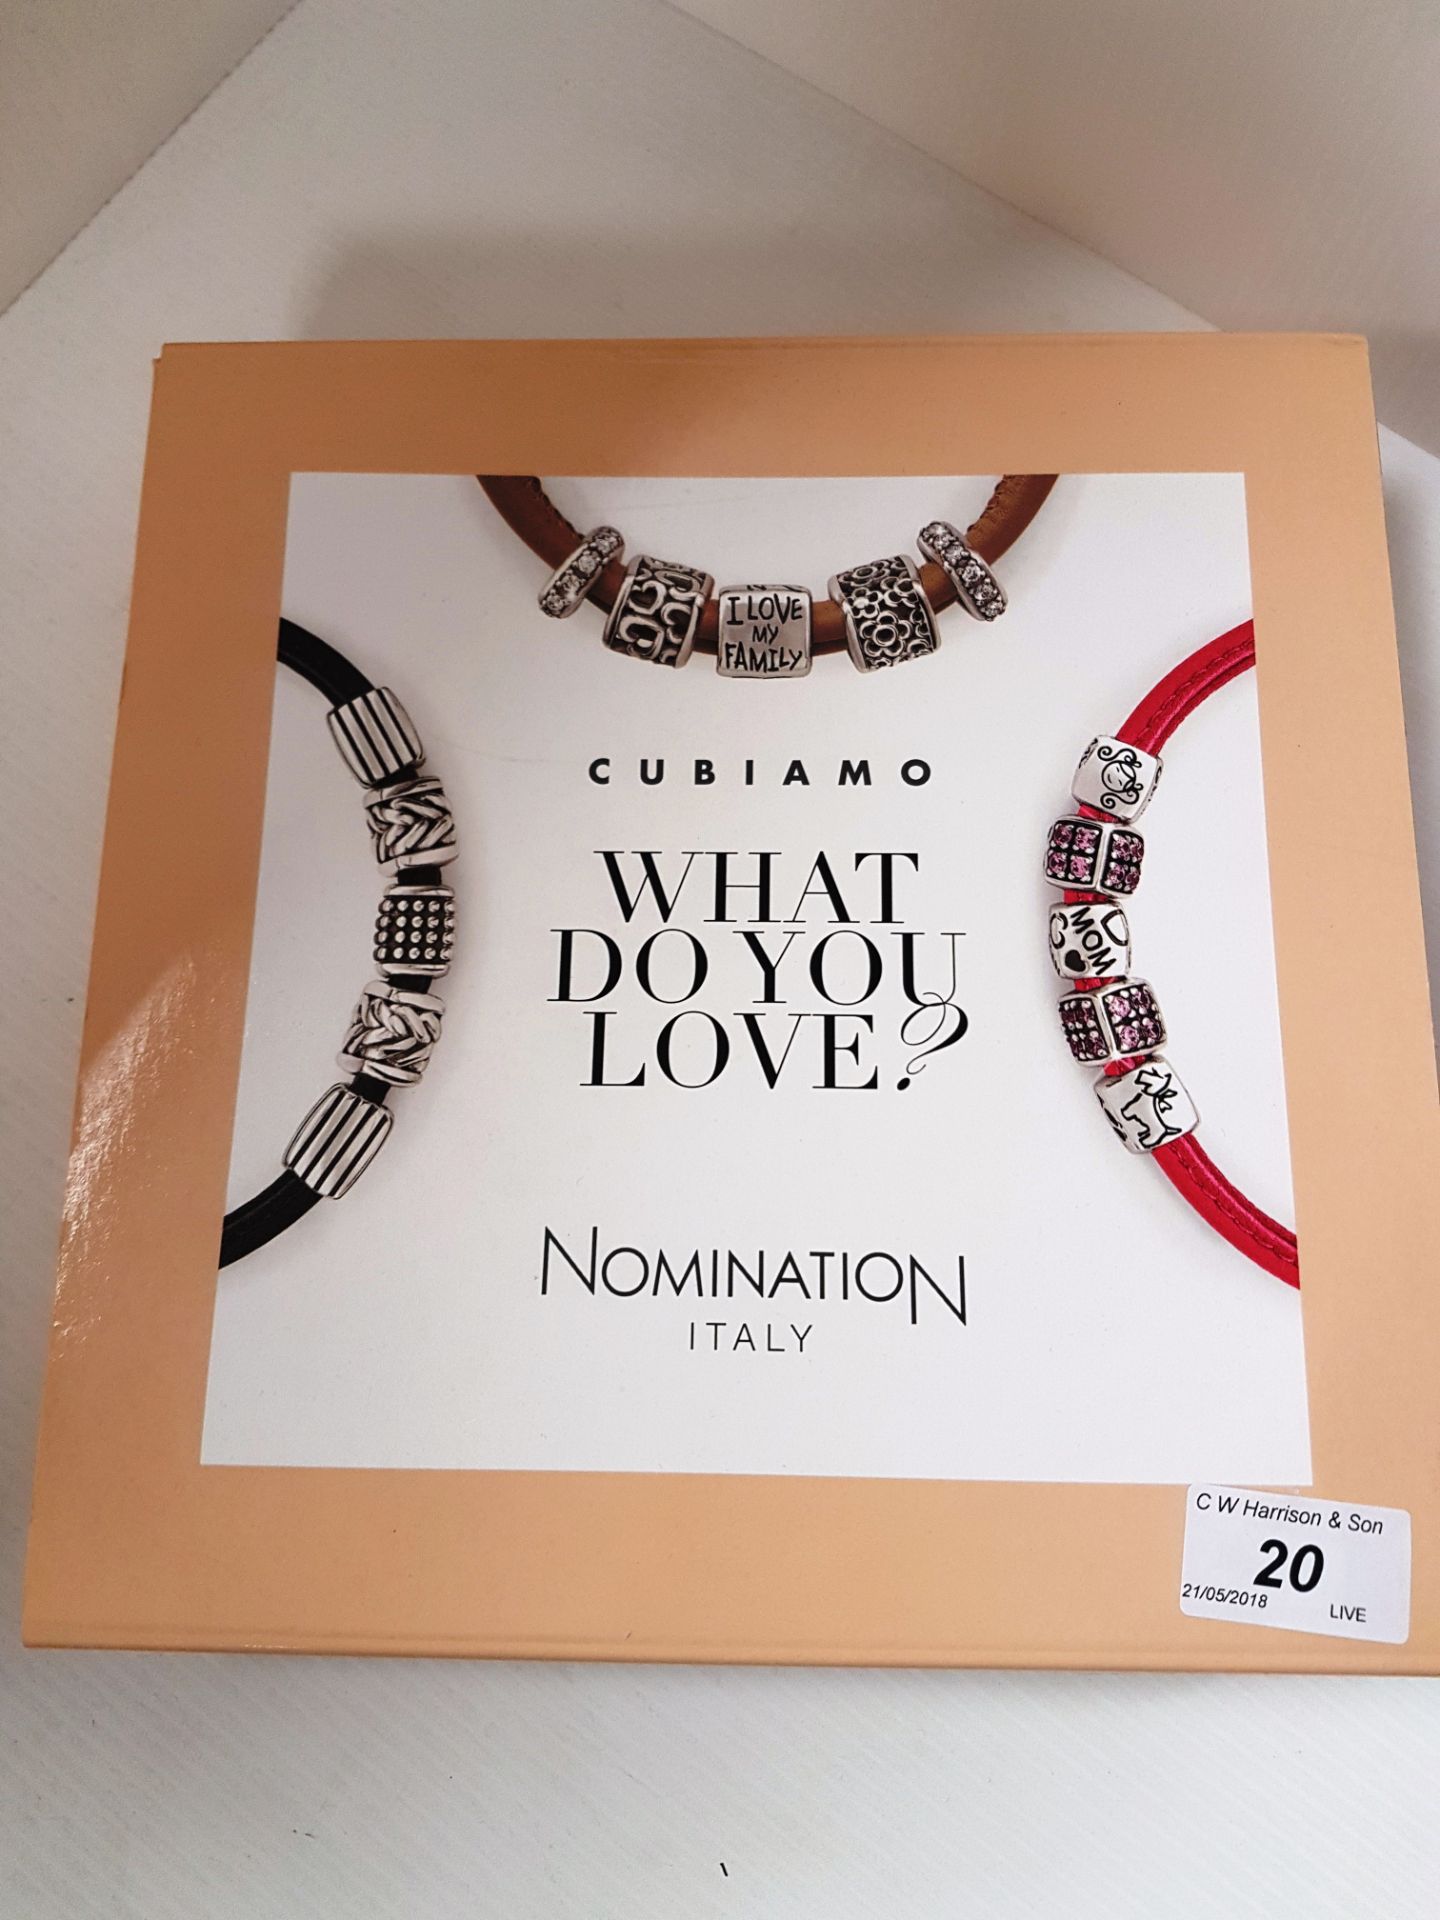 Box of Cubiamo Charms by Nomination Italy - including 52 cubes/charms (RRP £24-£37 each) and 14 x